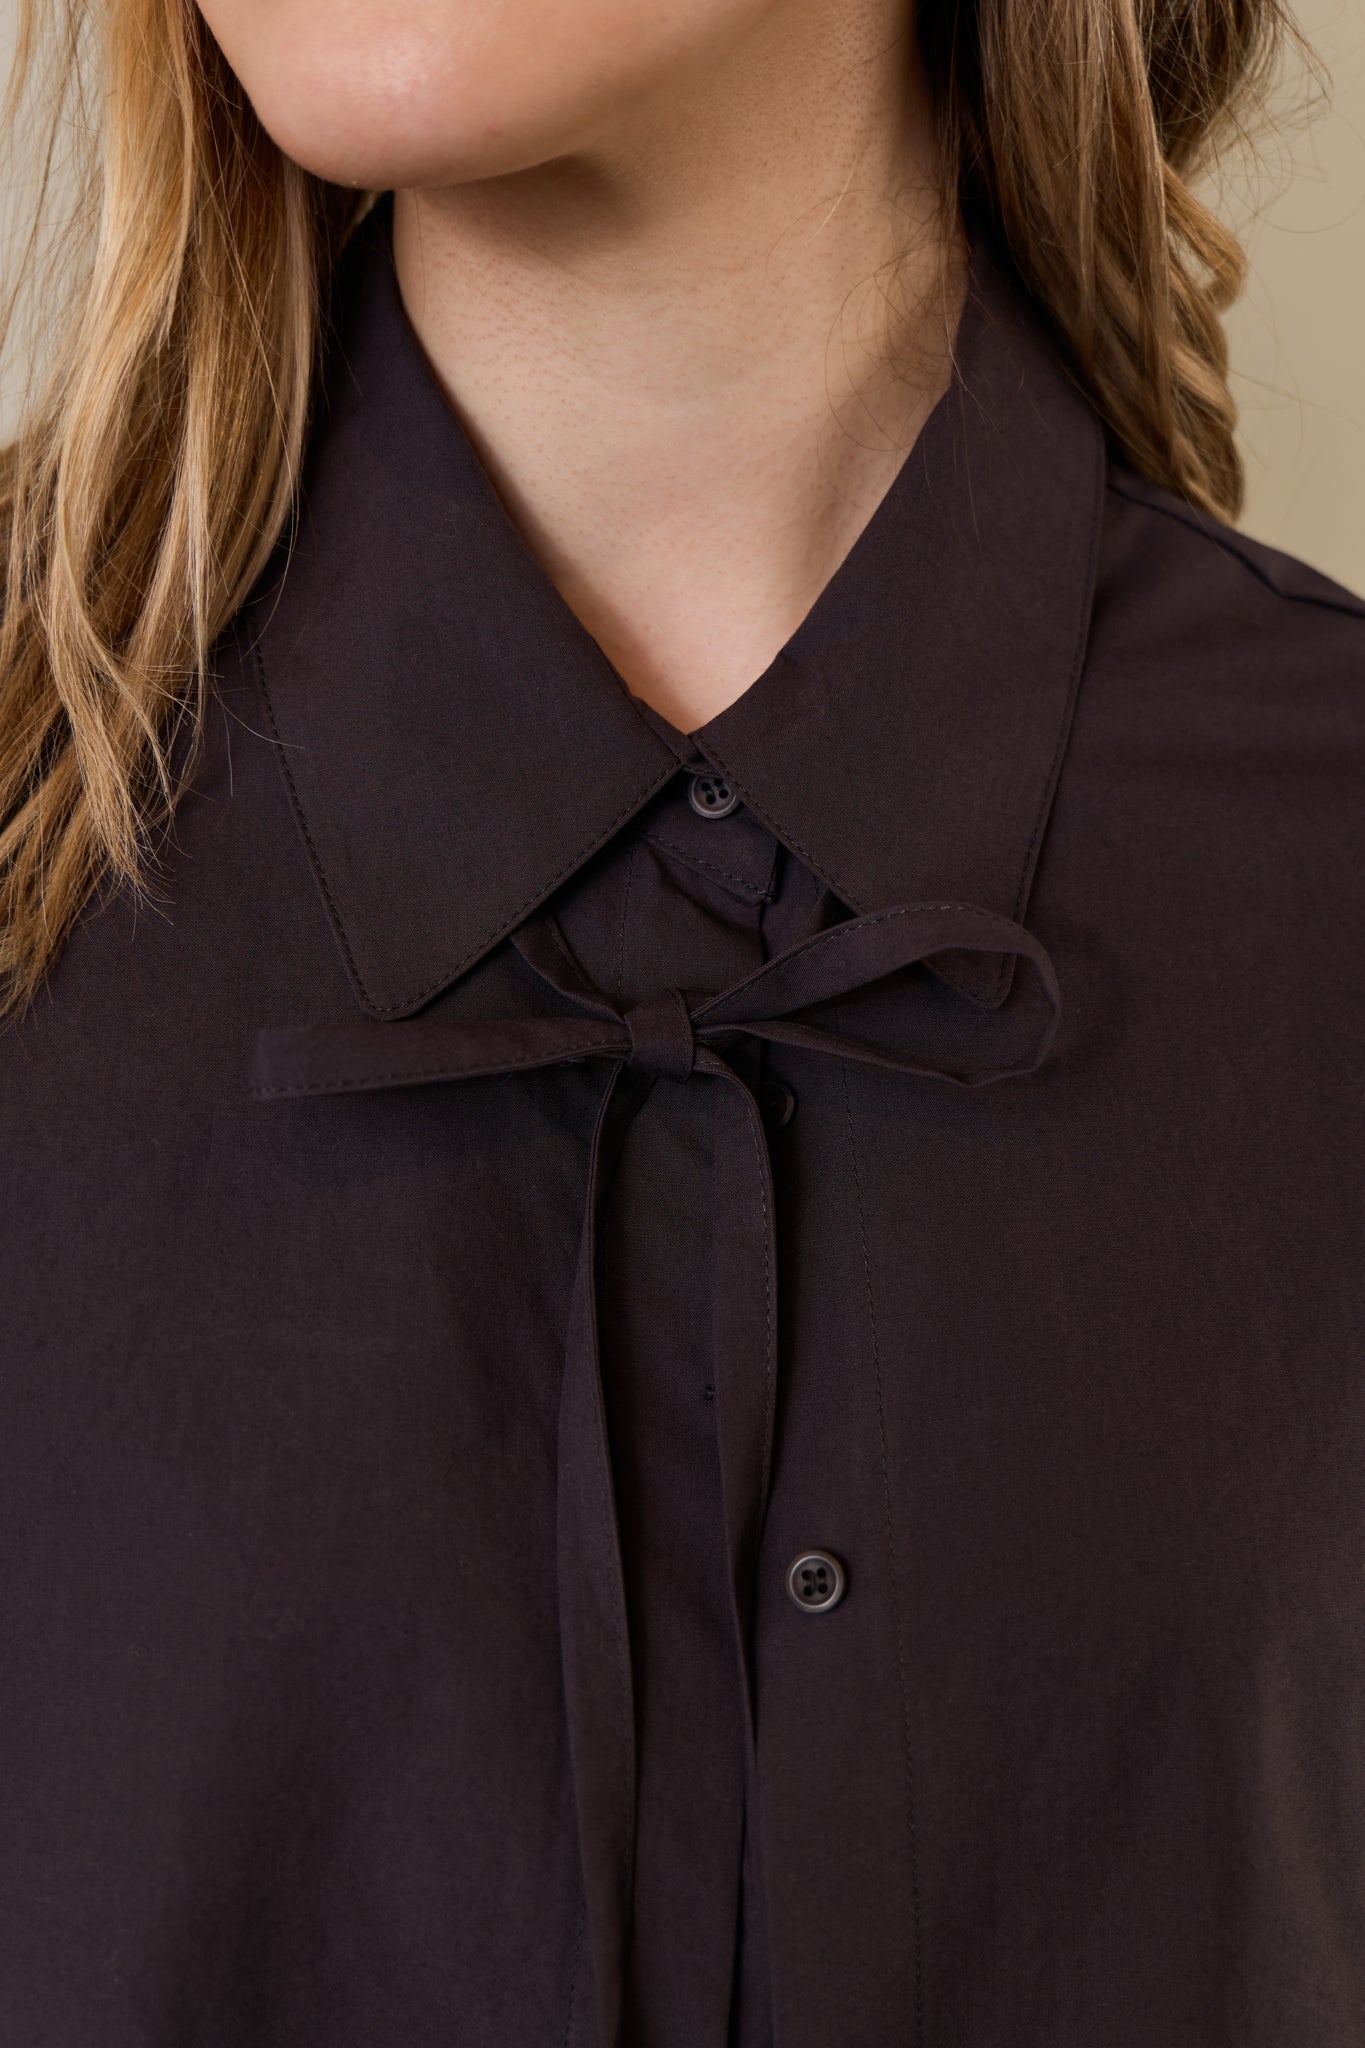 Barnet Cotton Shirt w/ String in Charcoal